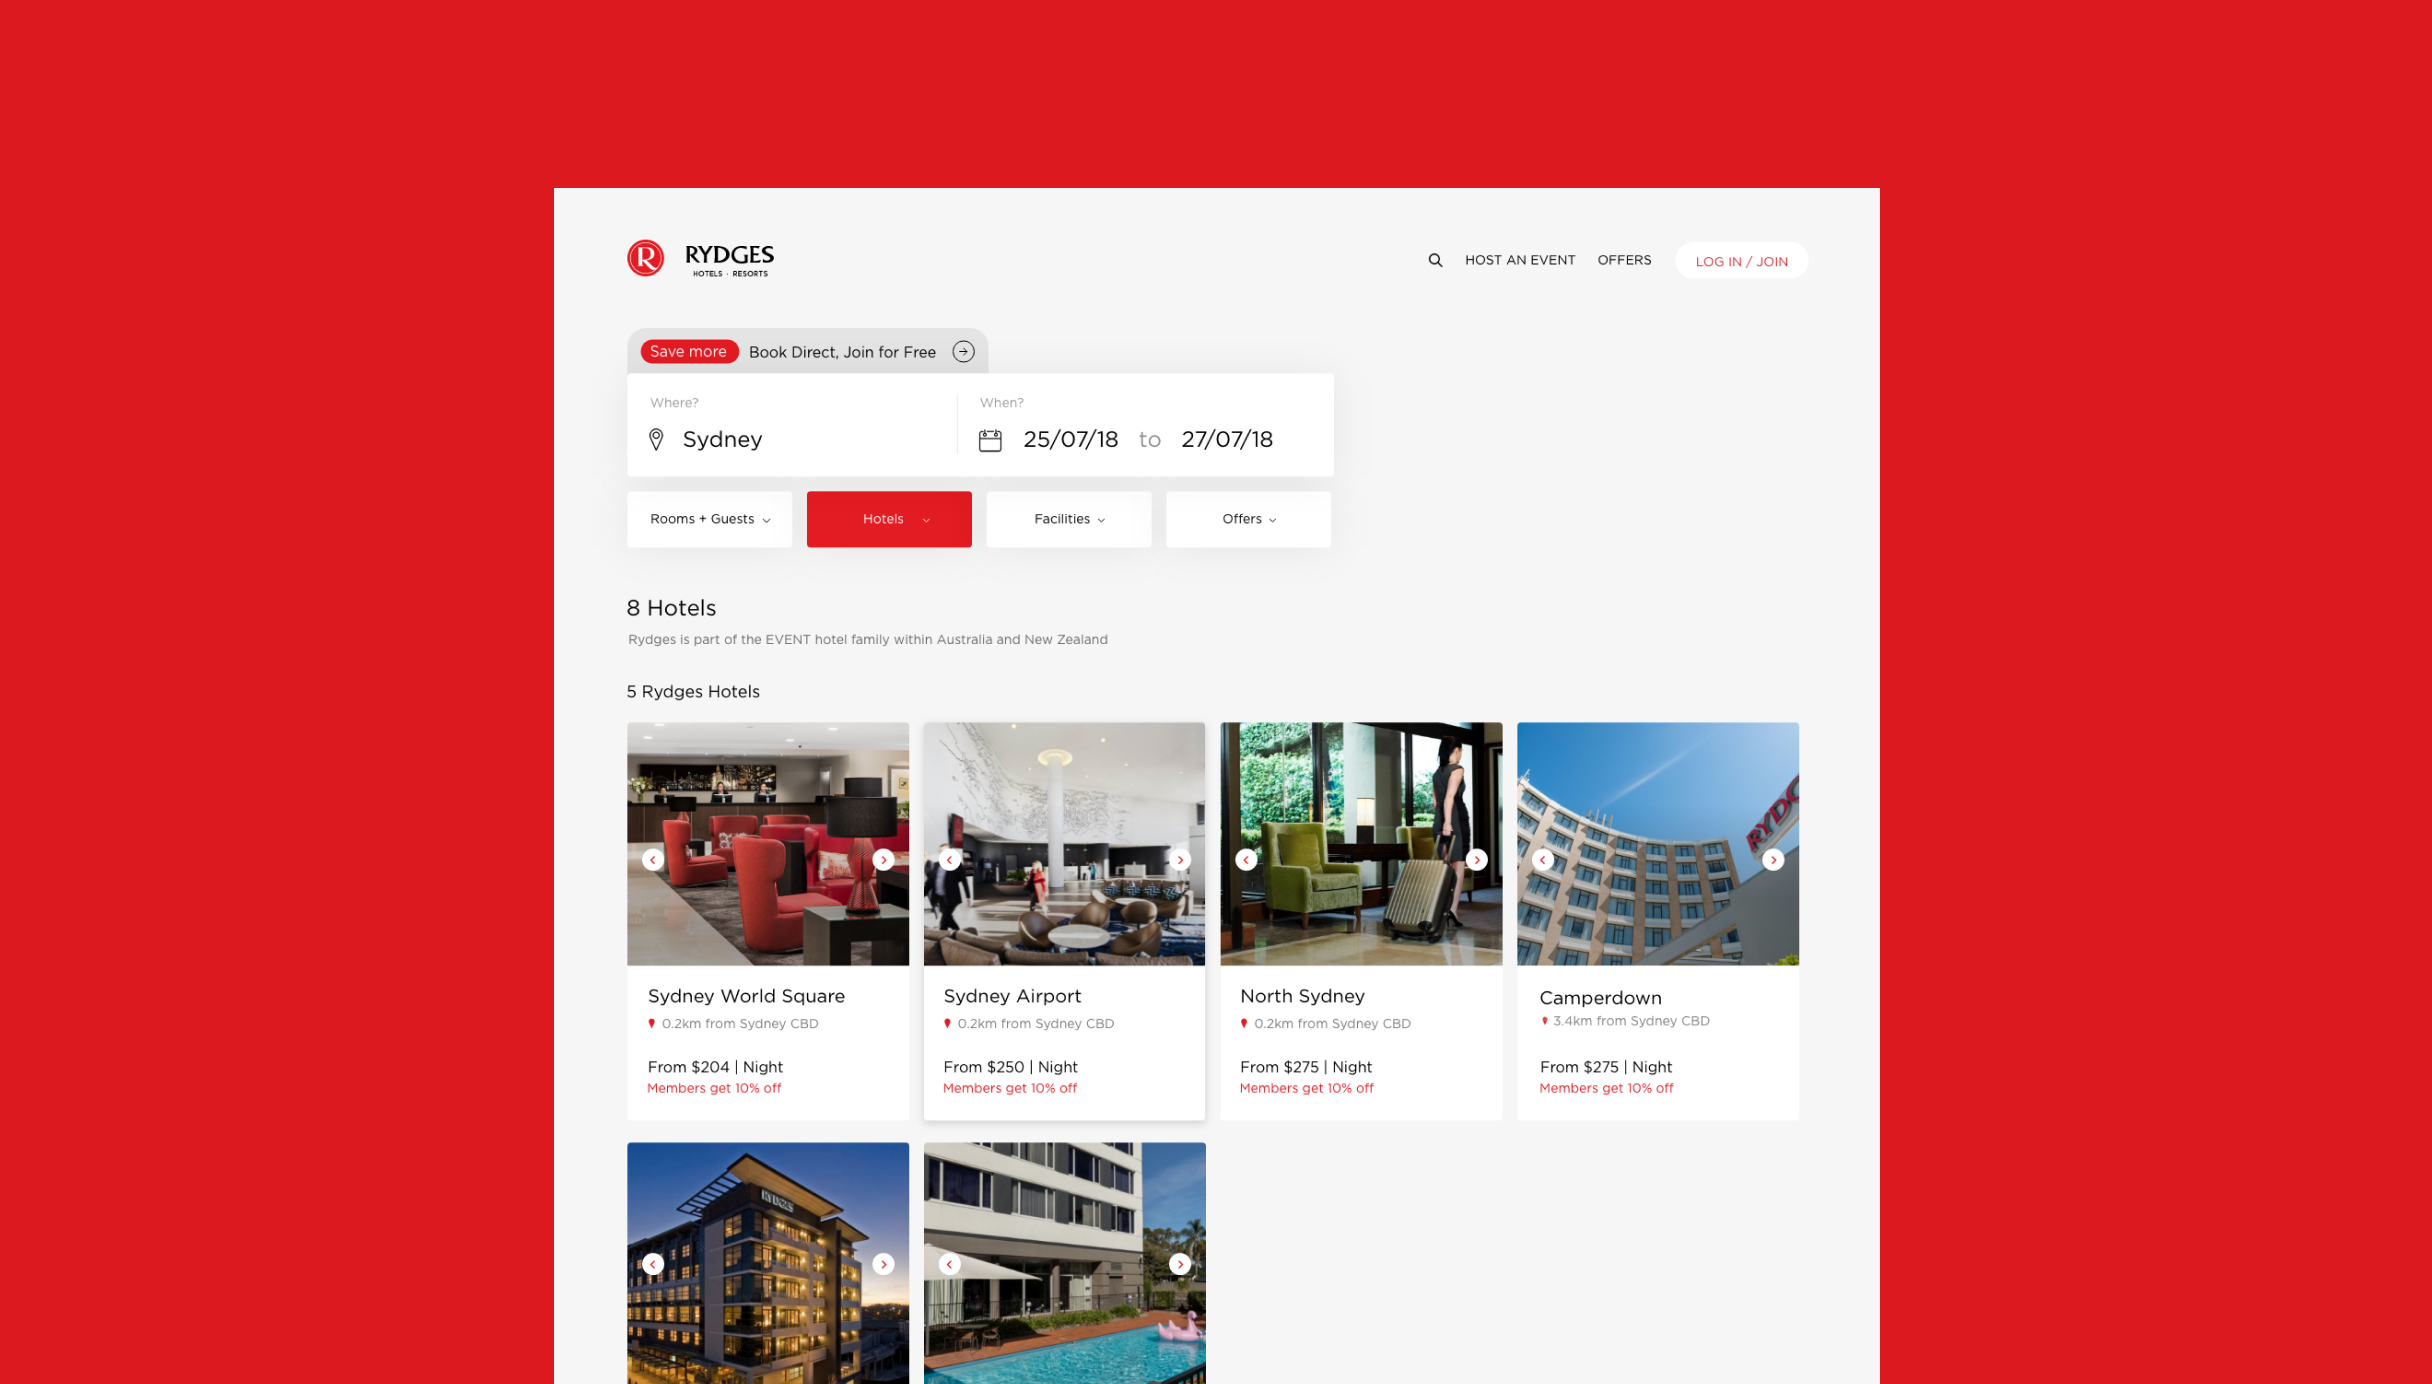 EVENT Rydges new website design, showcasing the new search design